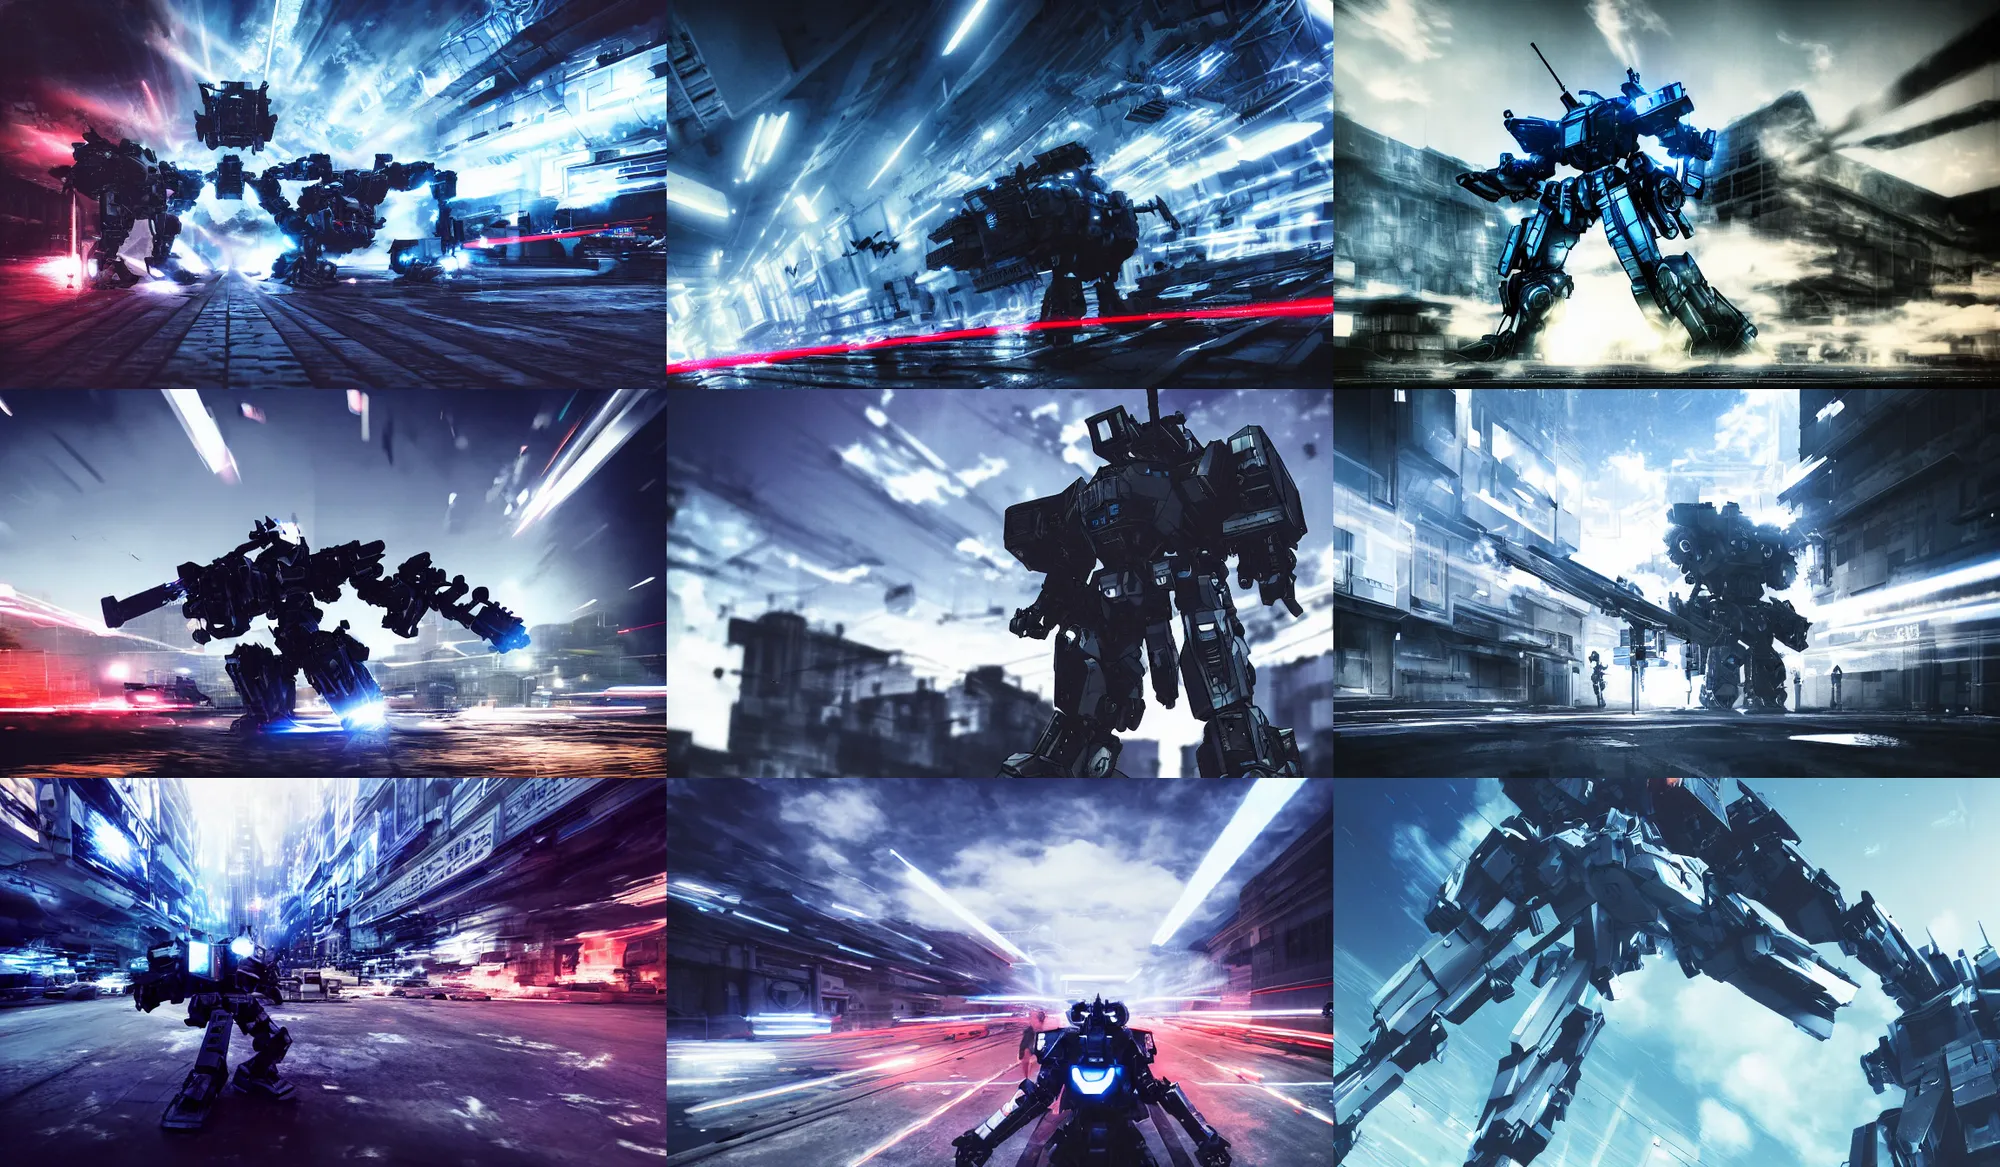 armored core 4, Stable Diffusion